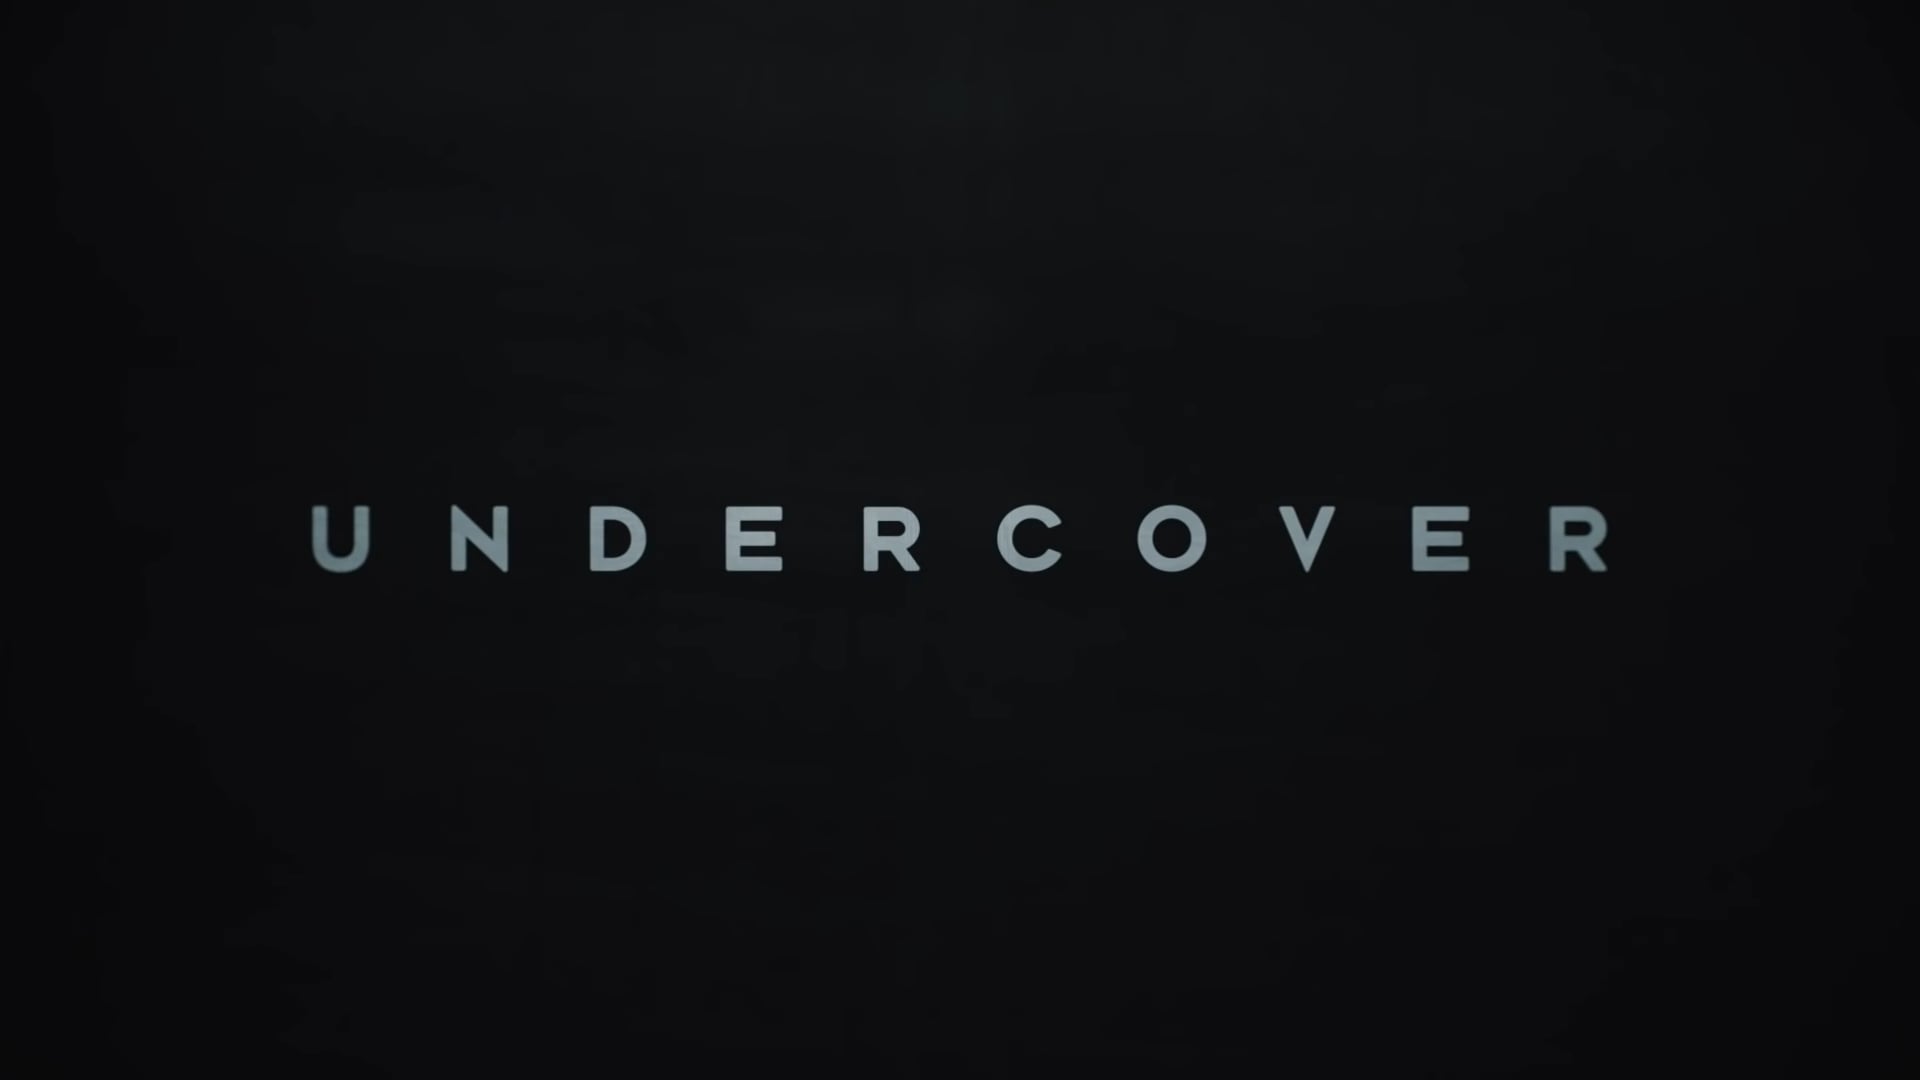 Netflix Undercover Season 3 Trailer, Coming to Netflix in January 2022